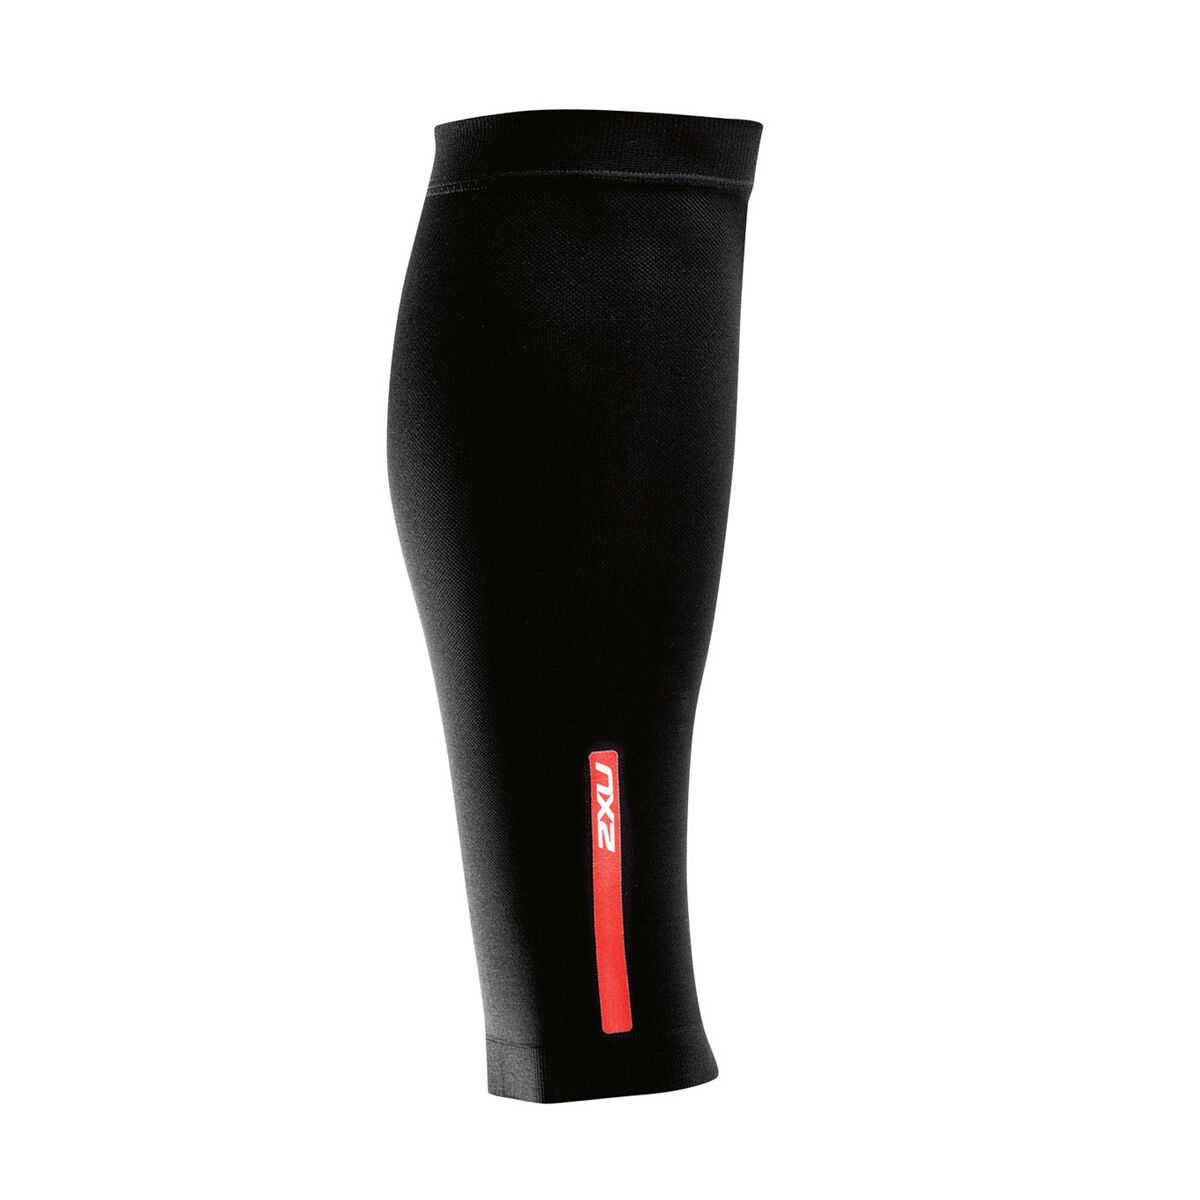 Recovery 101 & McDavid Compression Review